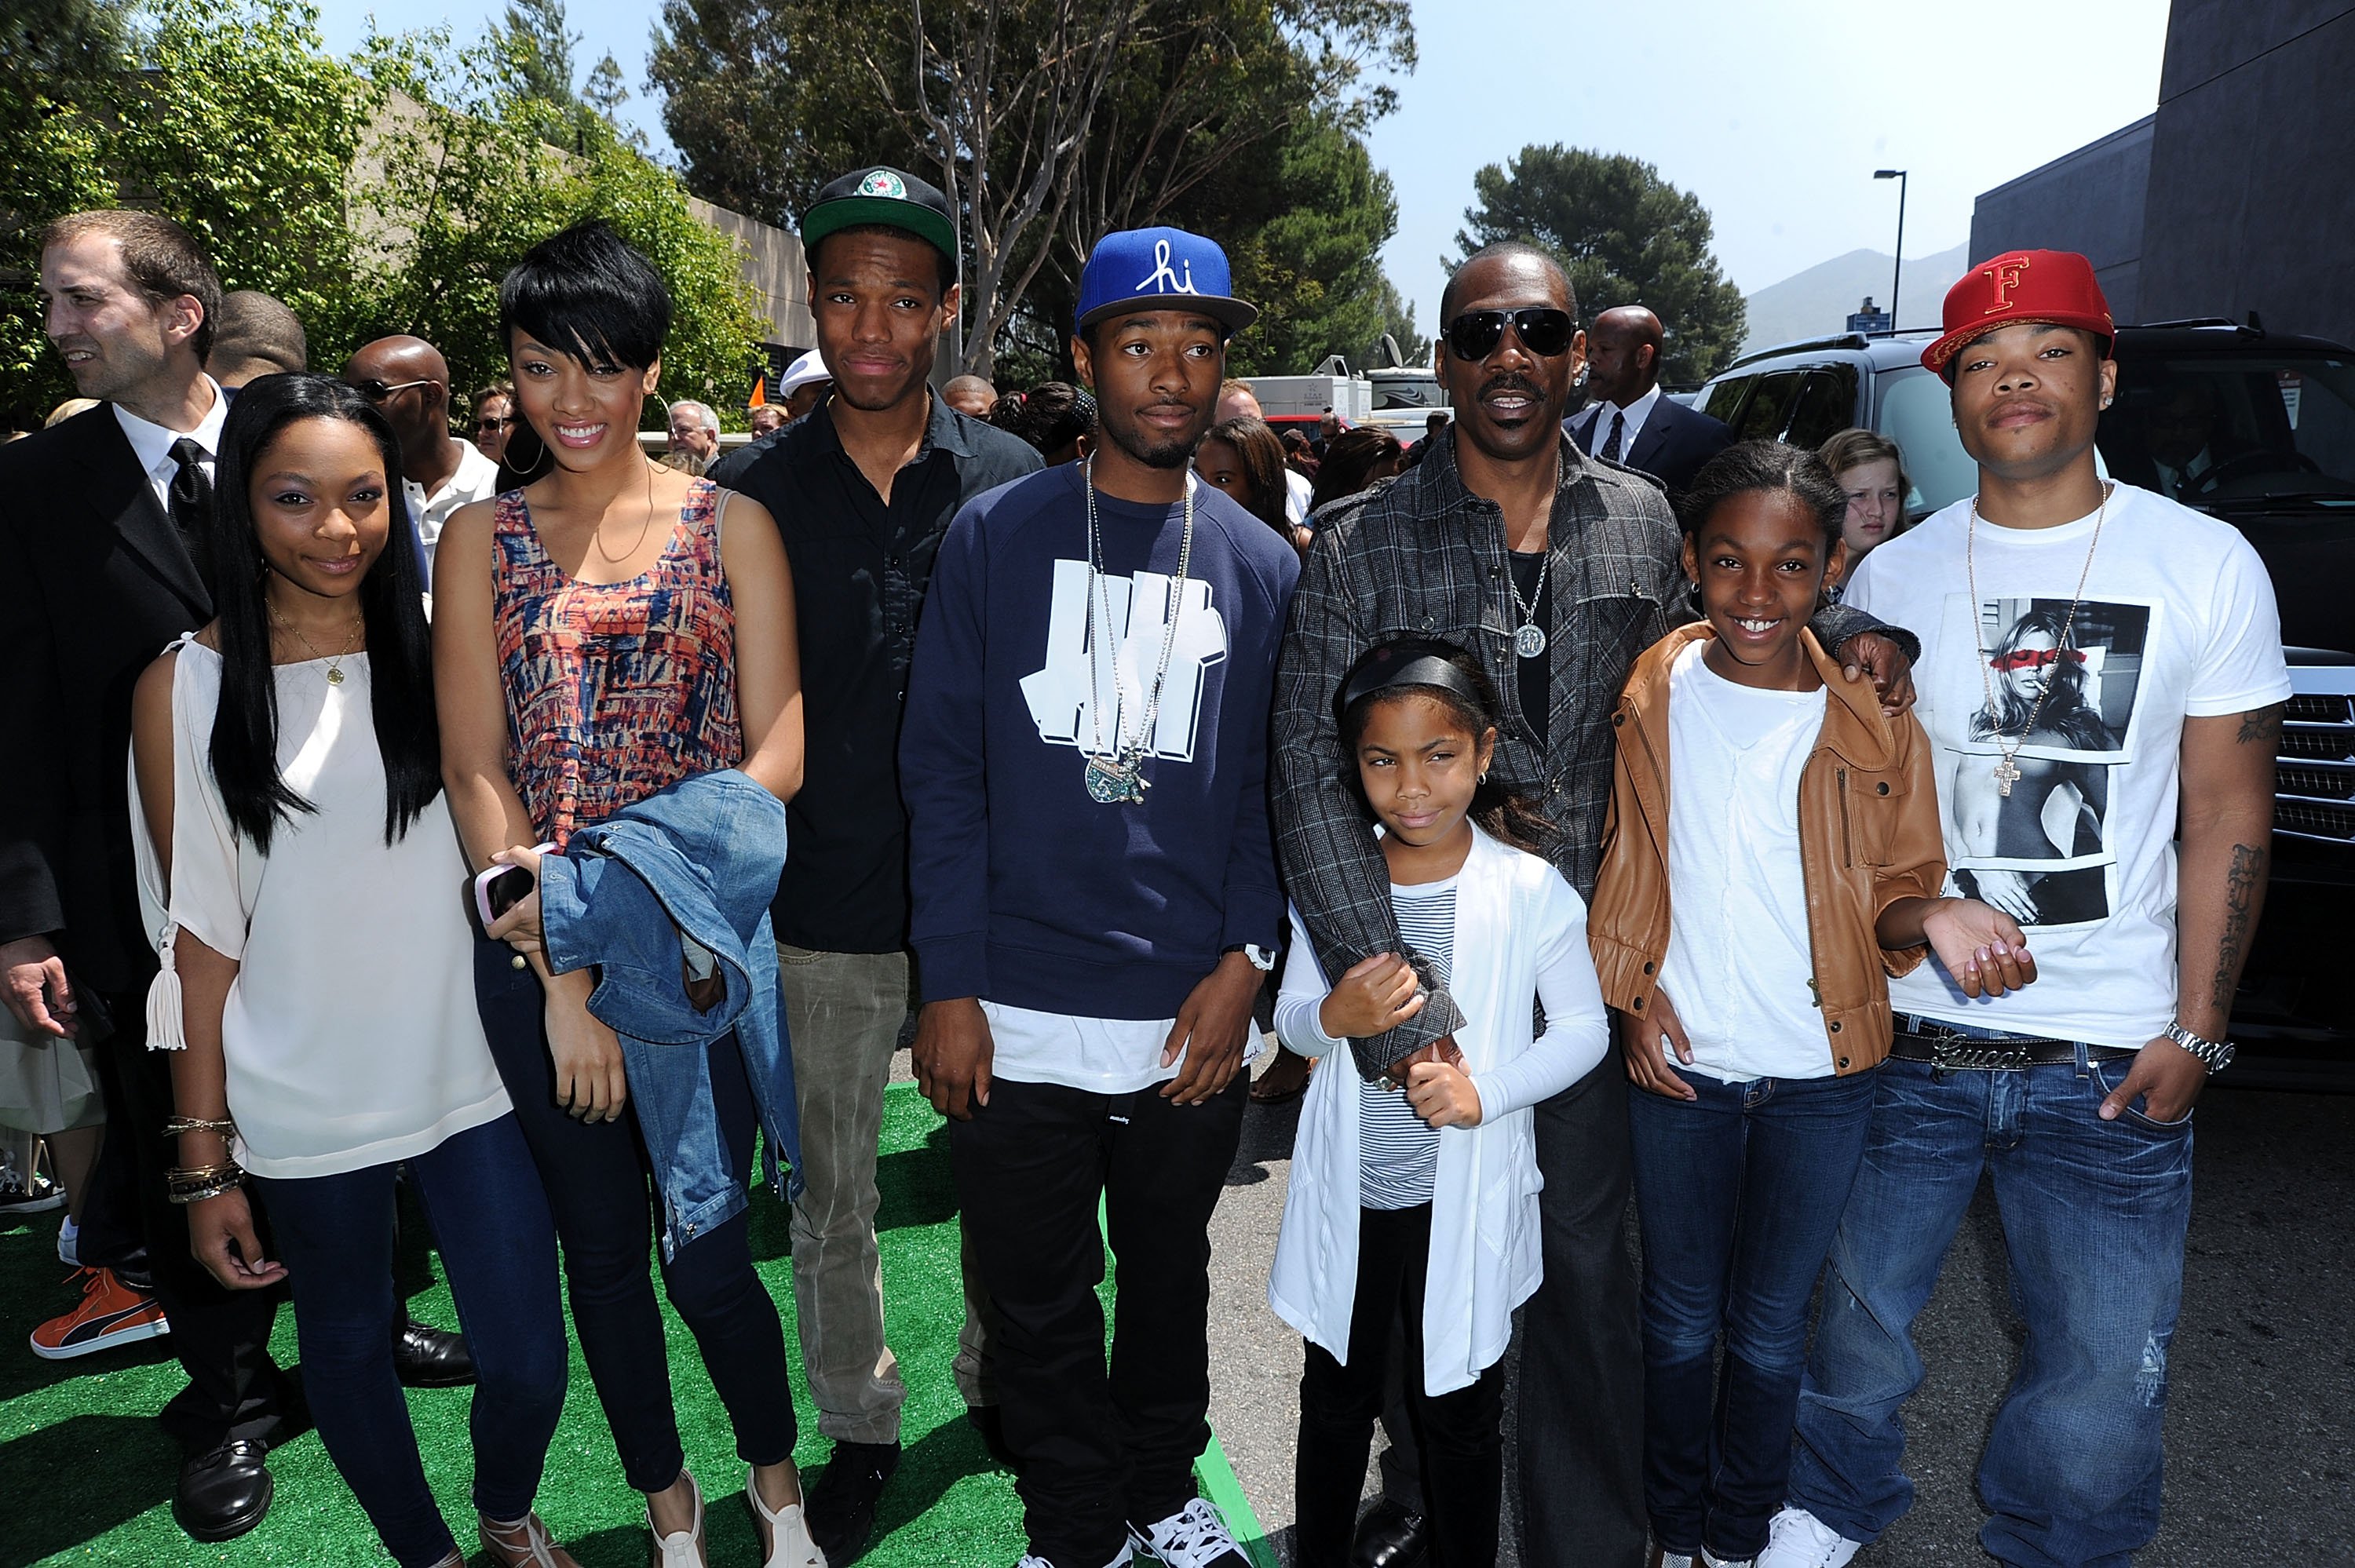 Shayne, Bria, Myles, Christian, Bella, Eddie, Zola, and Eric Murphy at the premiere of "Shrek Forever After" on May 16, 2010, in Universal City, California. | Source: Getty Images